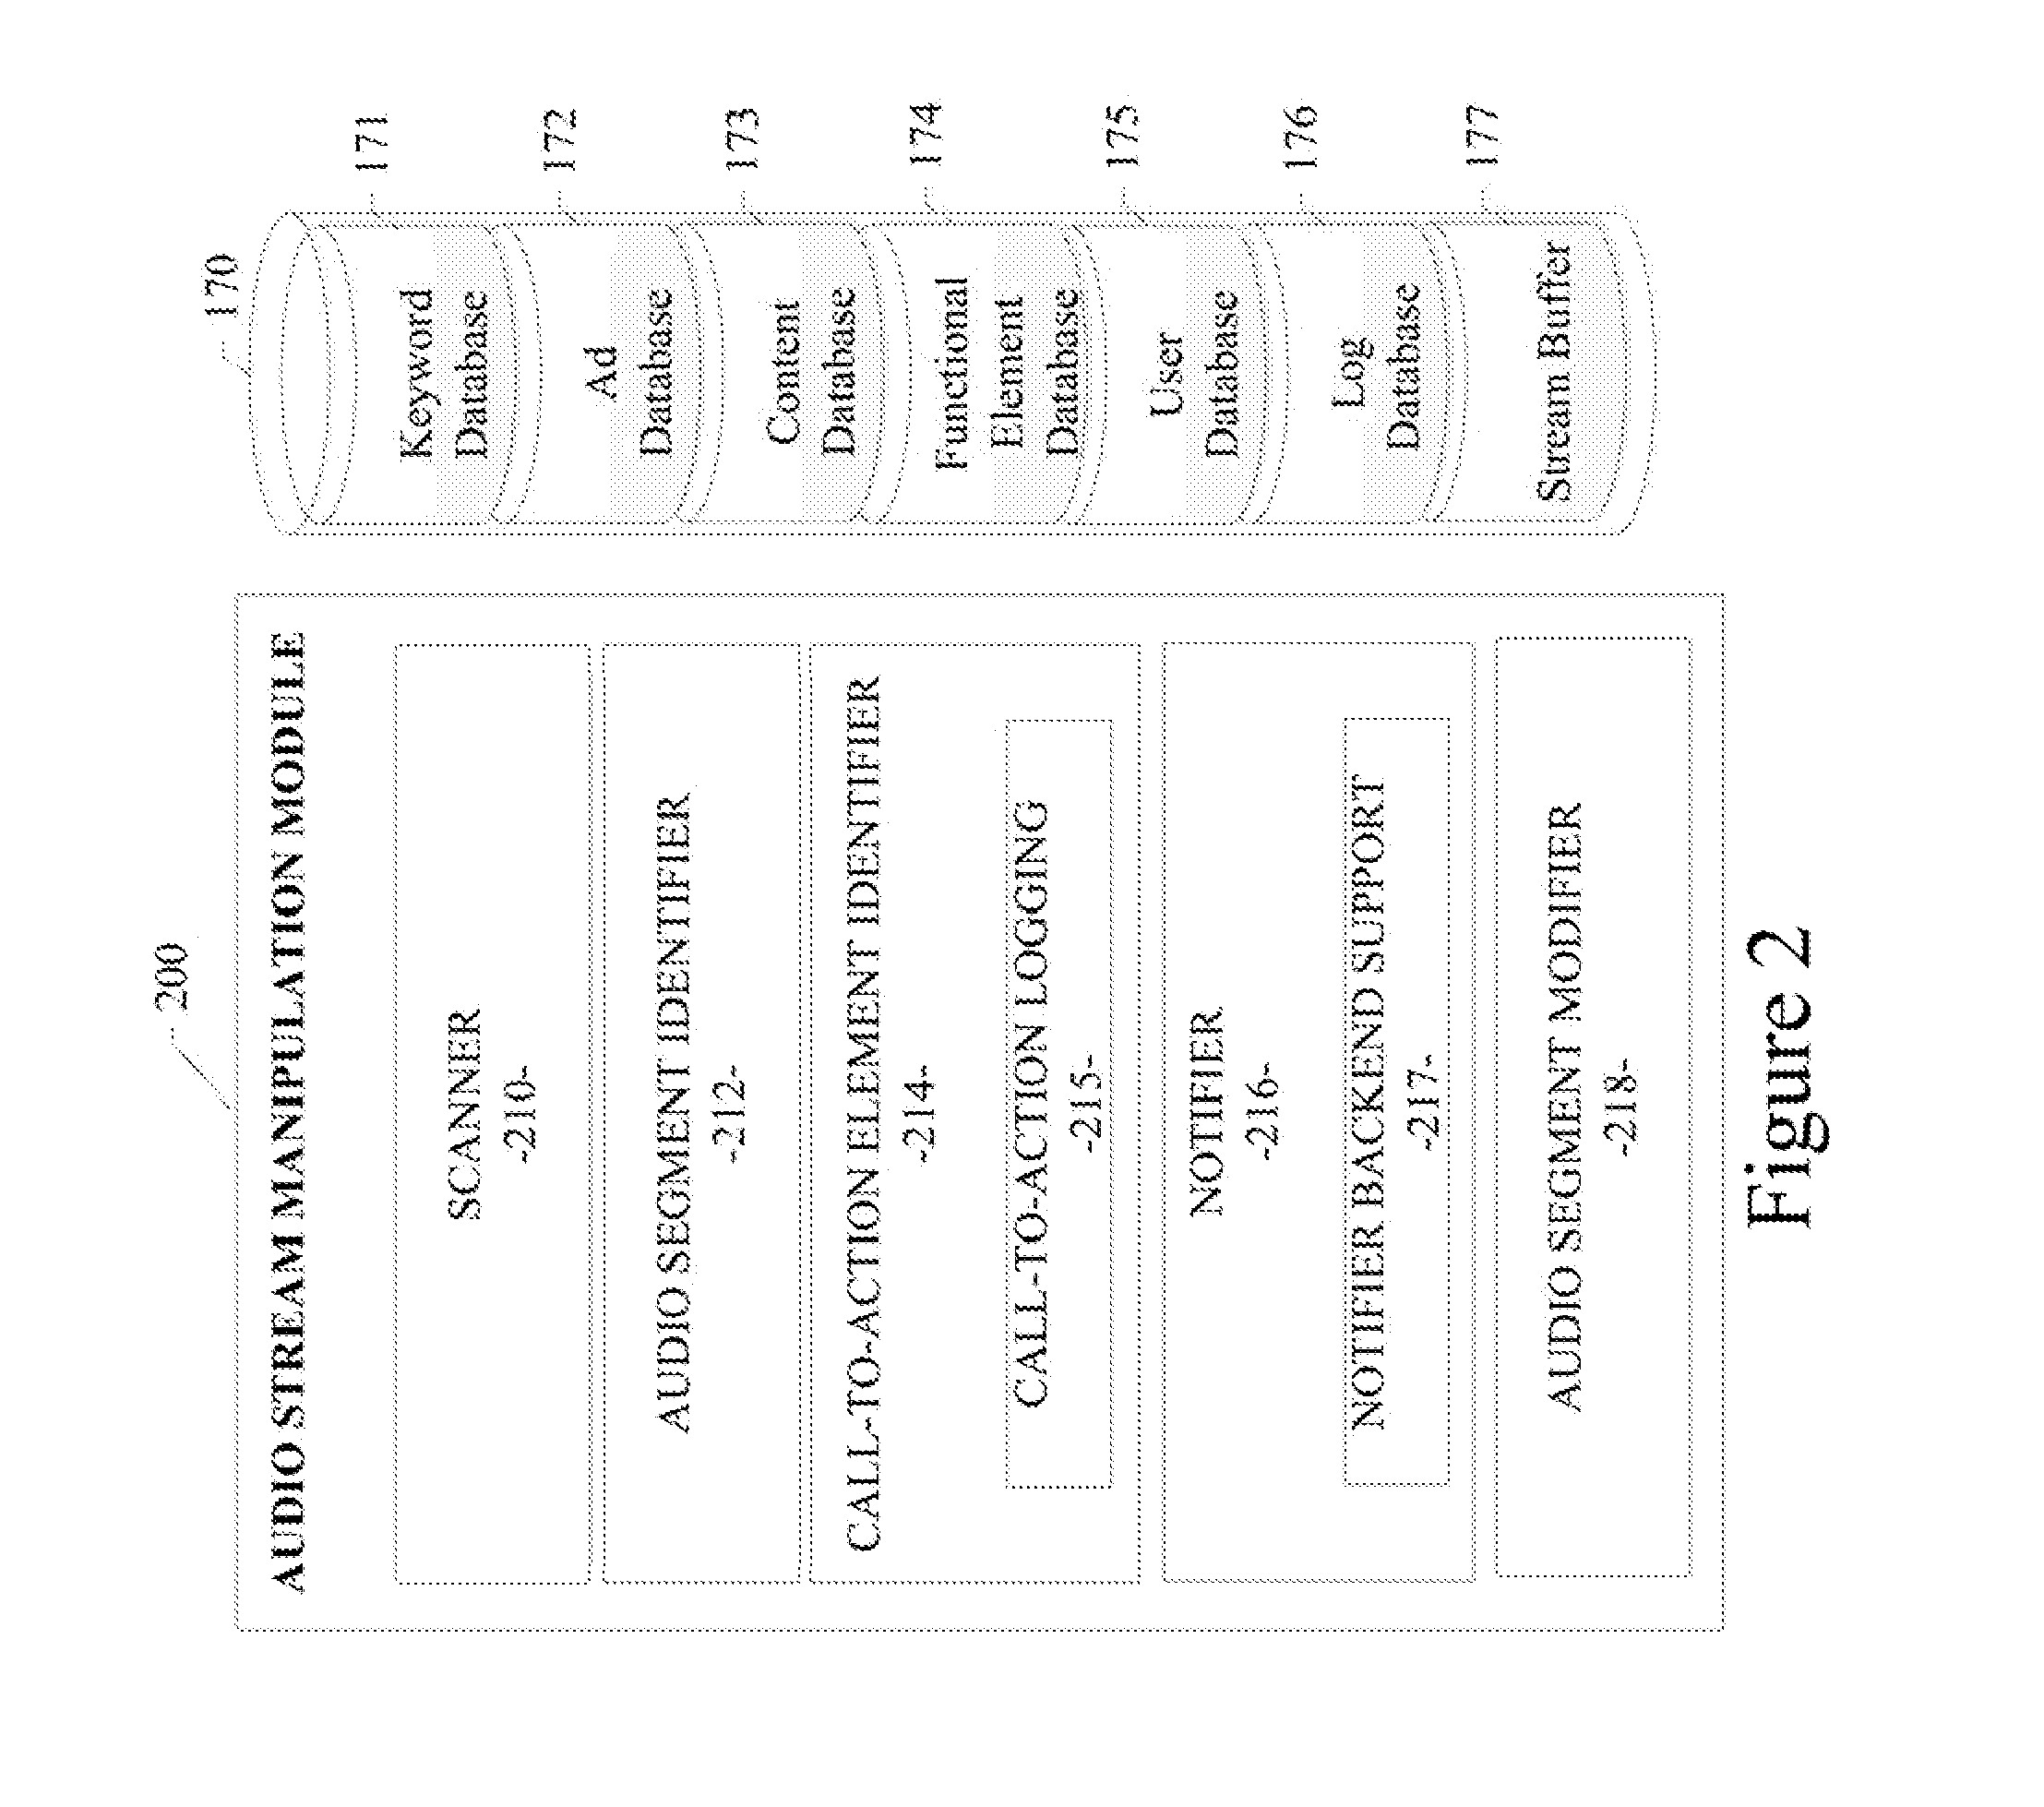 Audio stream manipulation for an in-vehicle infotainment system